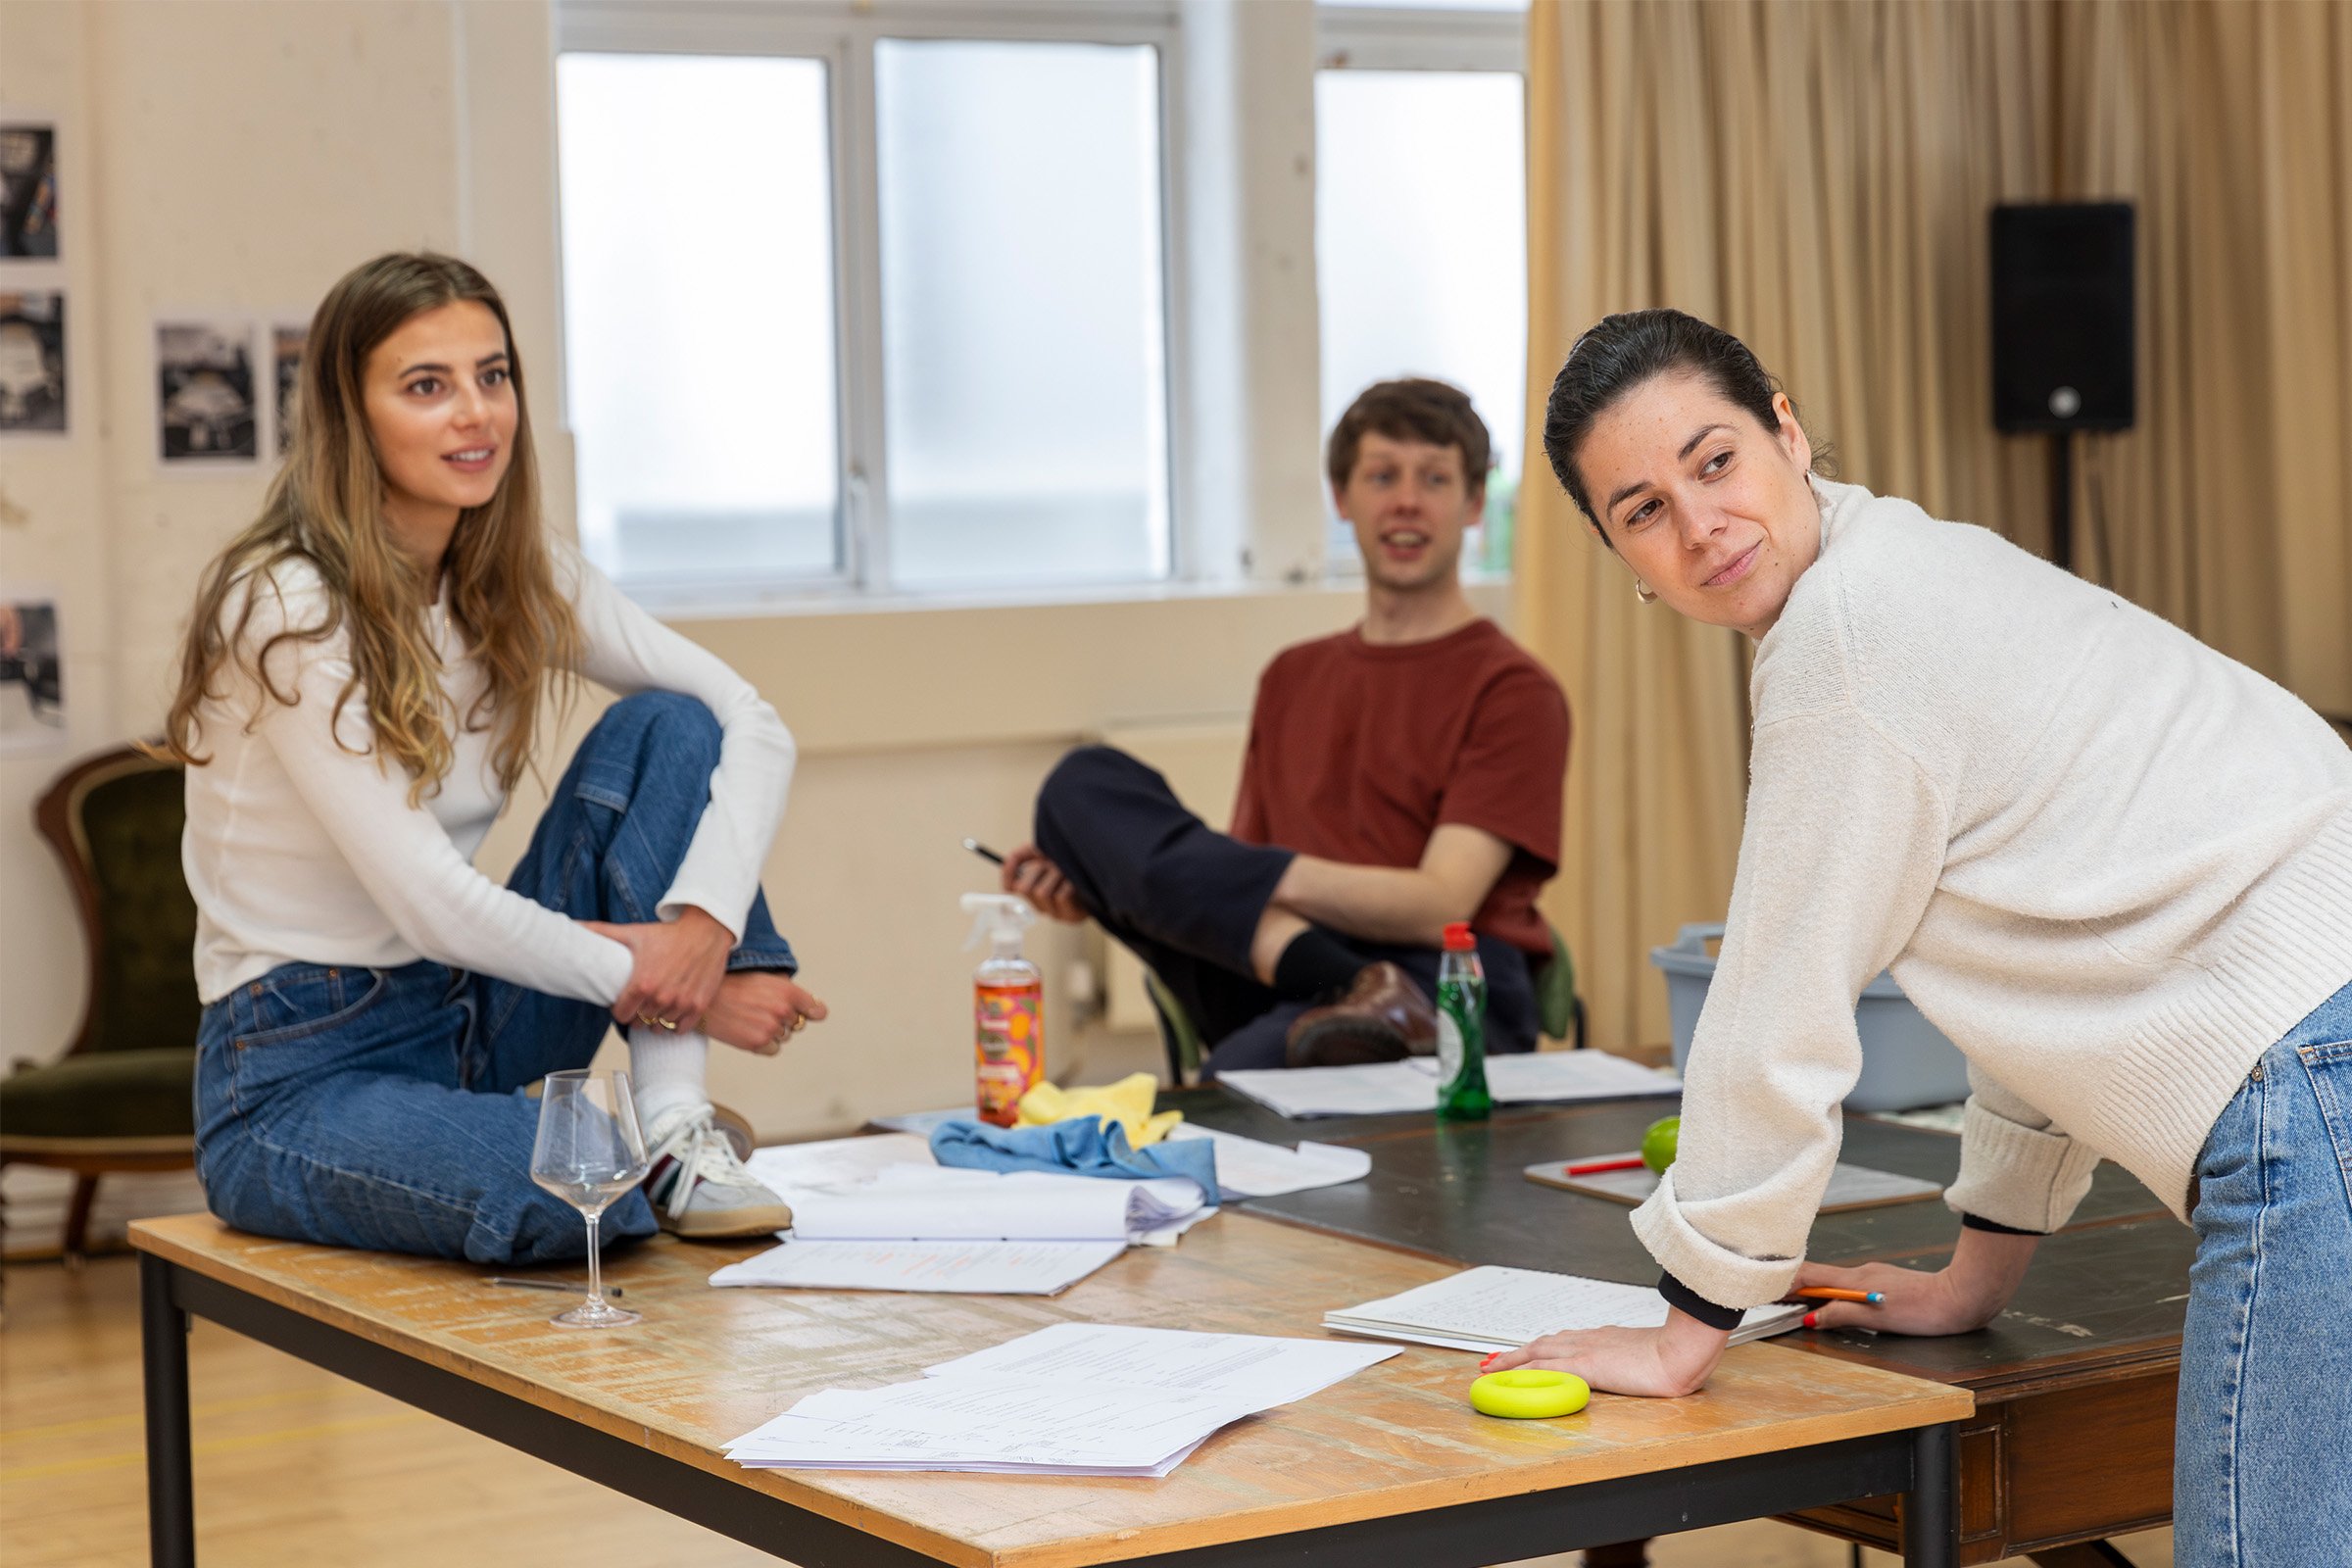 Nadia Parkes, Josh Finan and Holly Race Roughan in rehearsal for The House Party Photo Ellie Kurttz.jpg